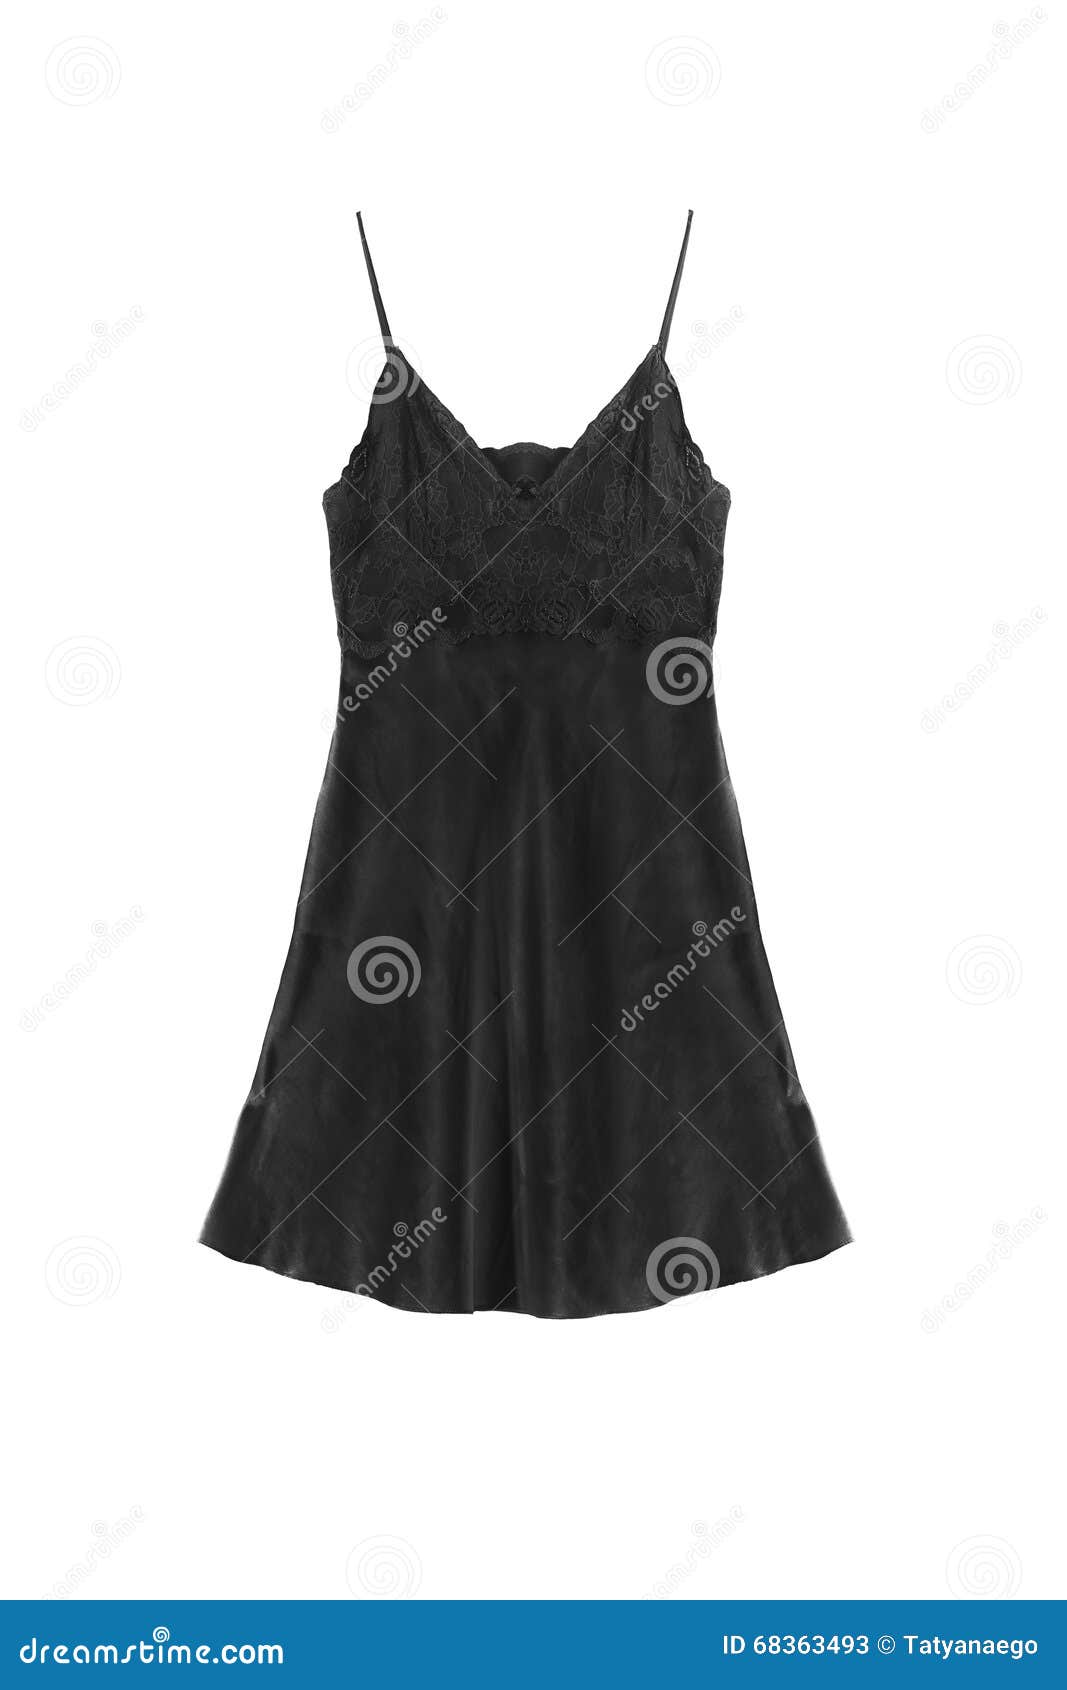 Black nightgown stock image. Image of dress, lingerie - 68363493